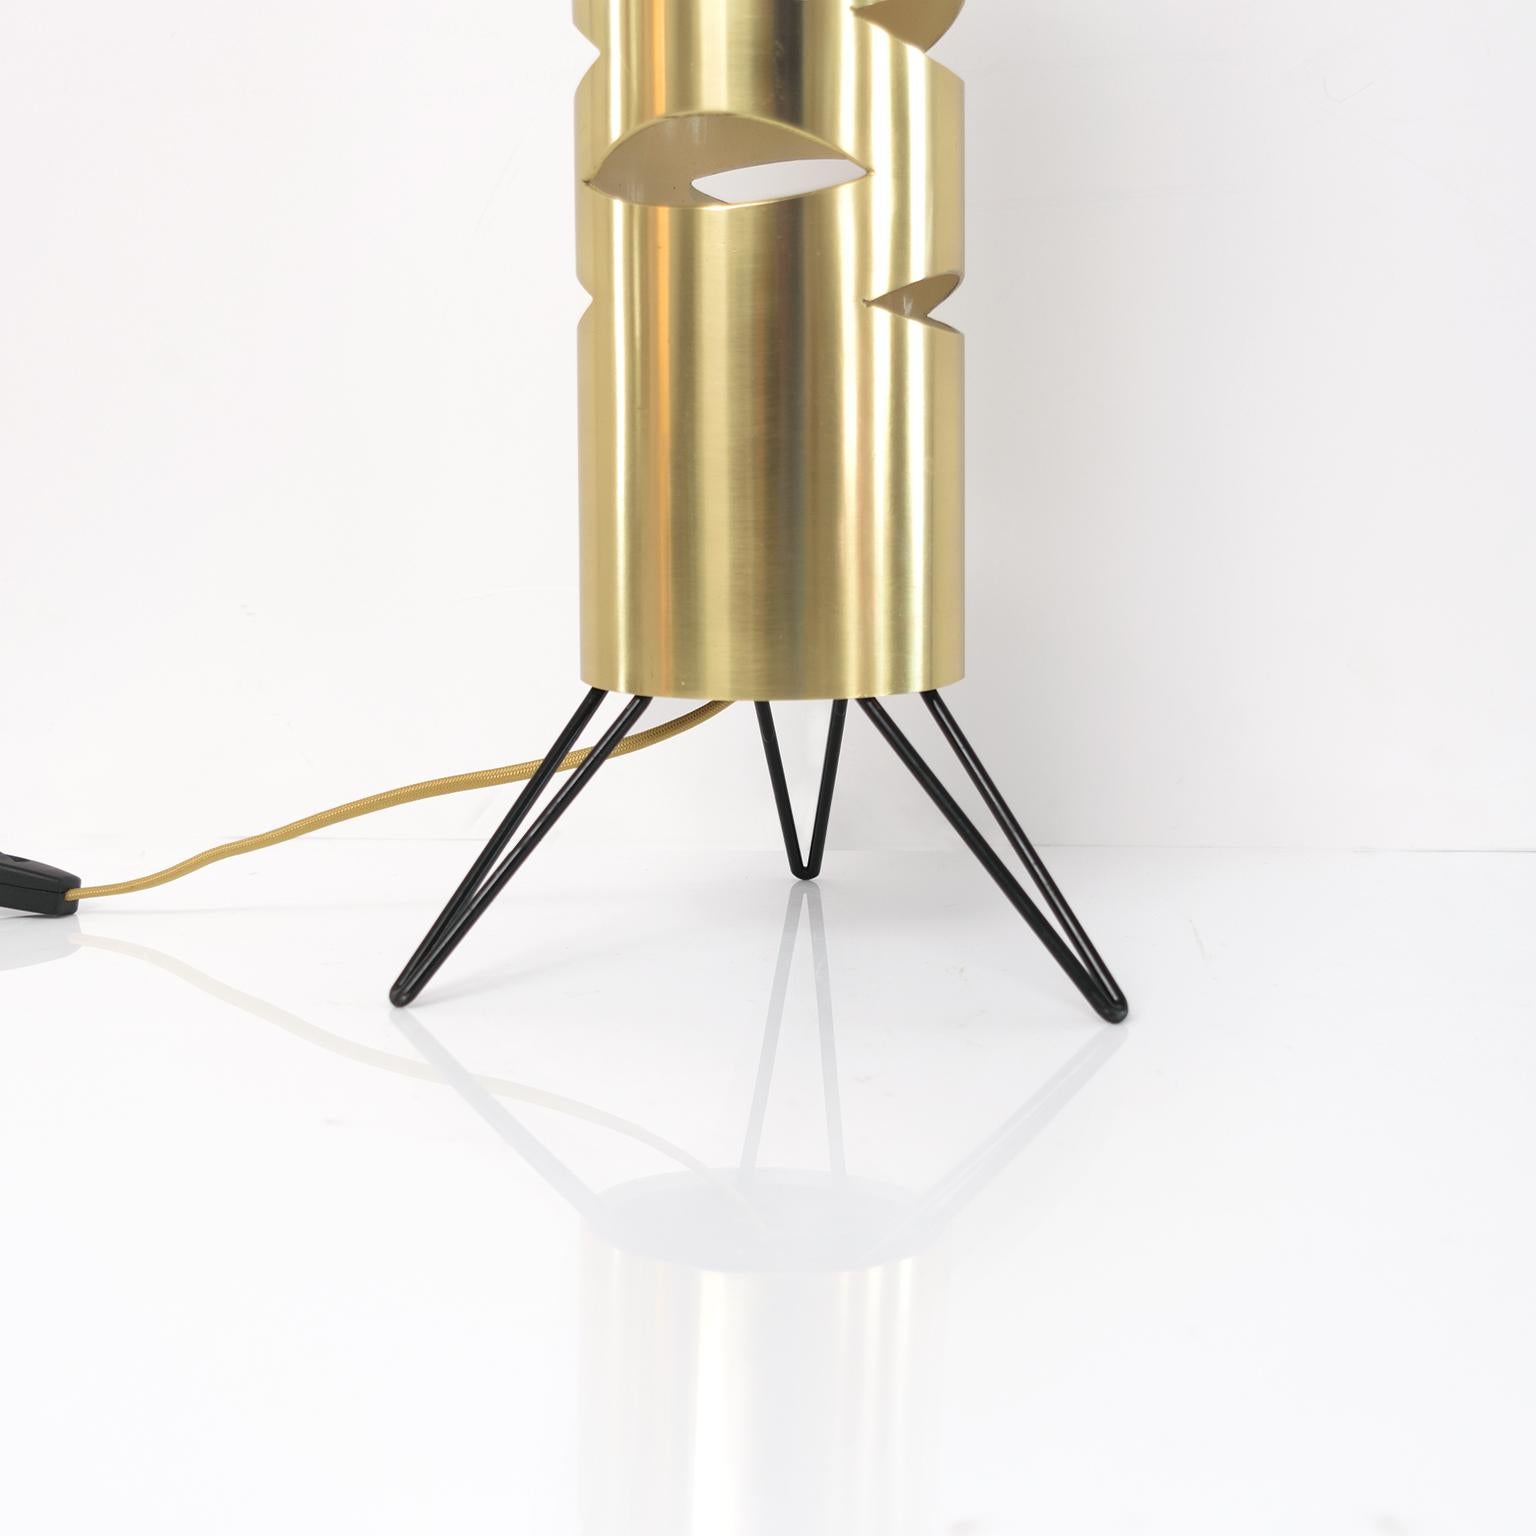 Scandinavian Modern Cylindrical Brass Lamp with Cutouts on a Tripod Base In Good Condition For Sale In New York, NY